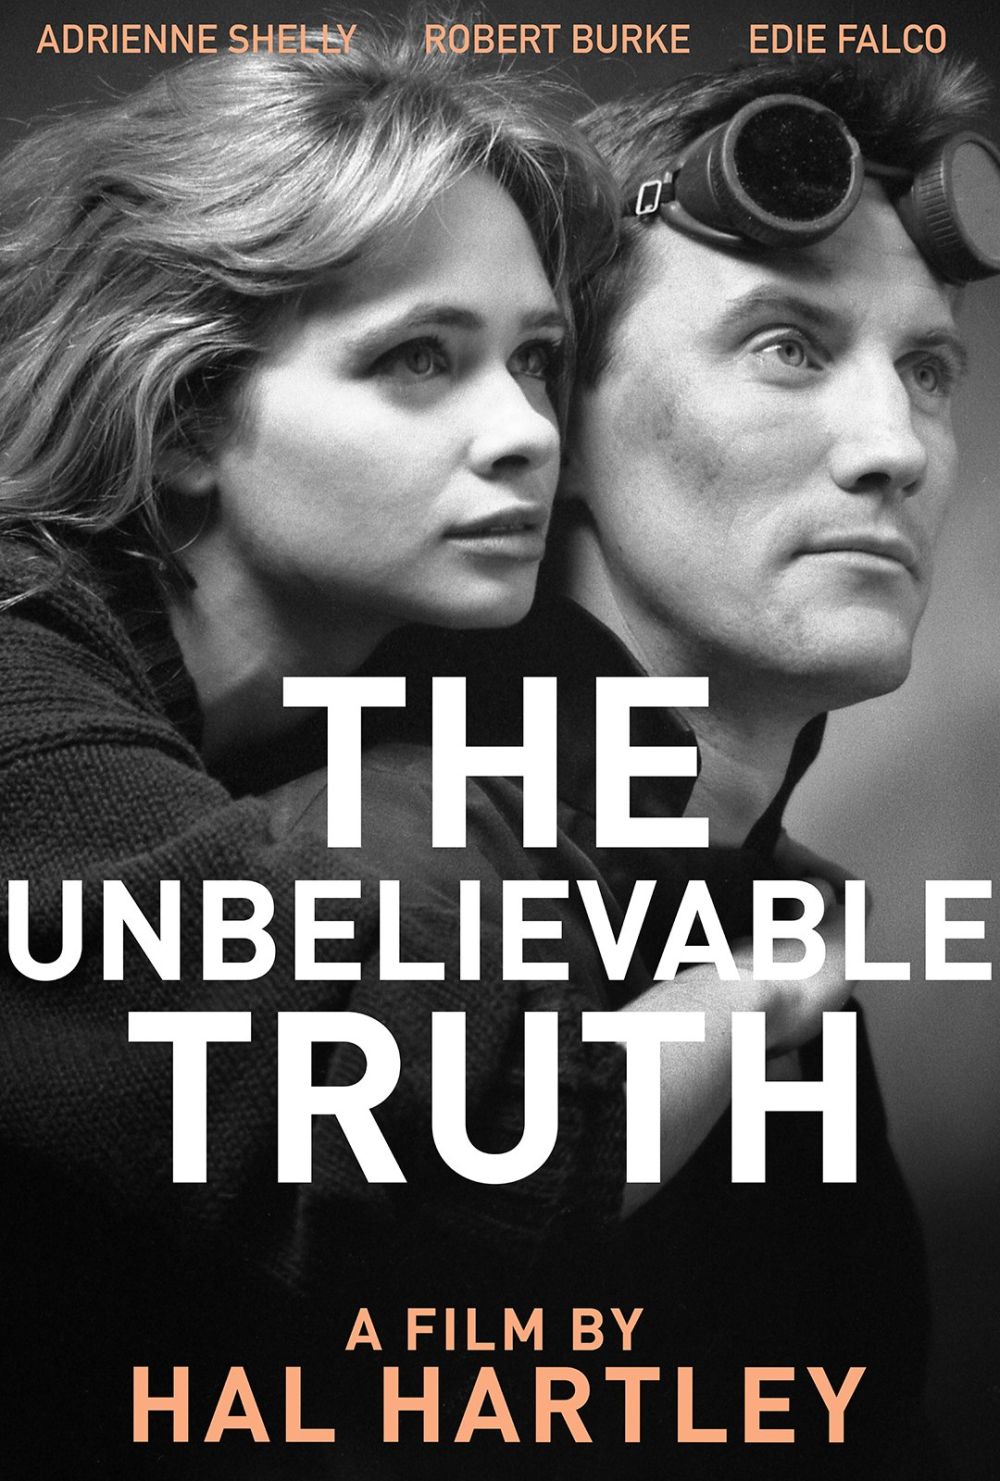 Film poster for The Unbelievable Truth (1989) by Hal Hartley '84